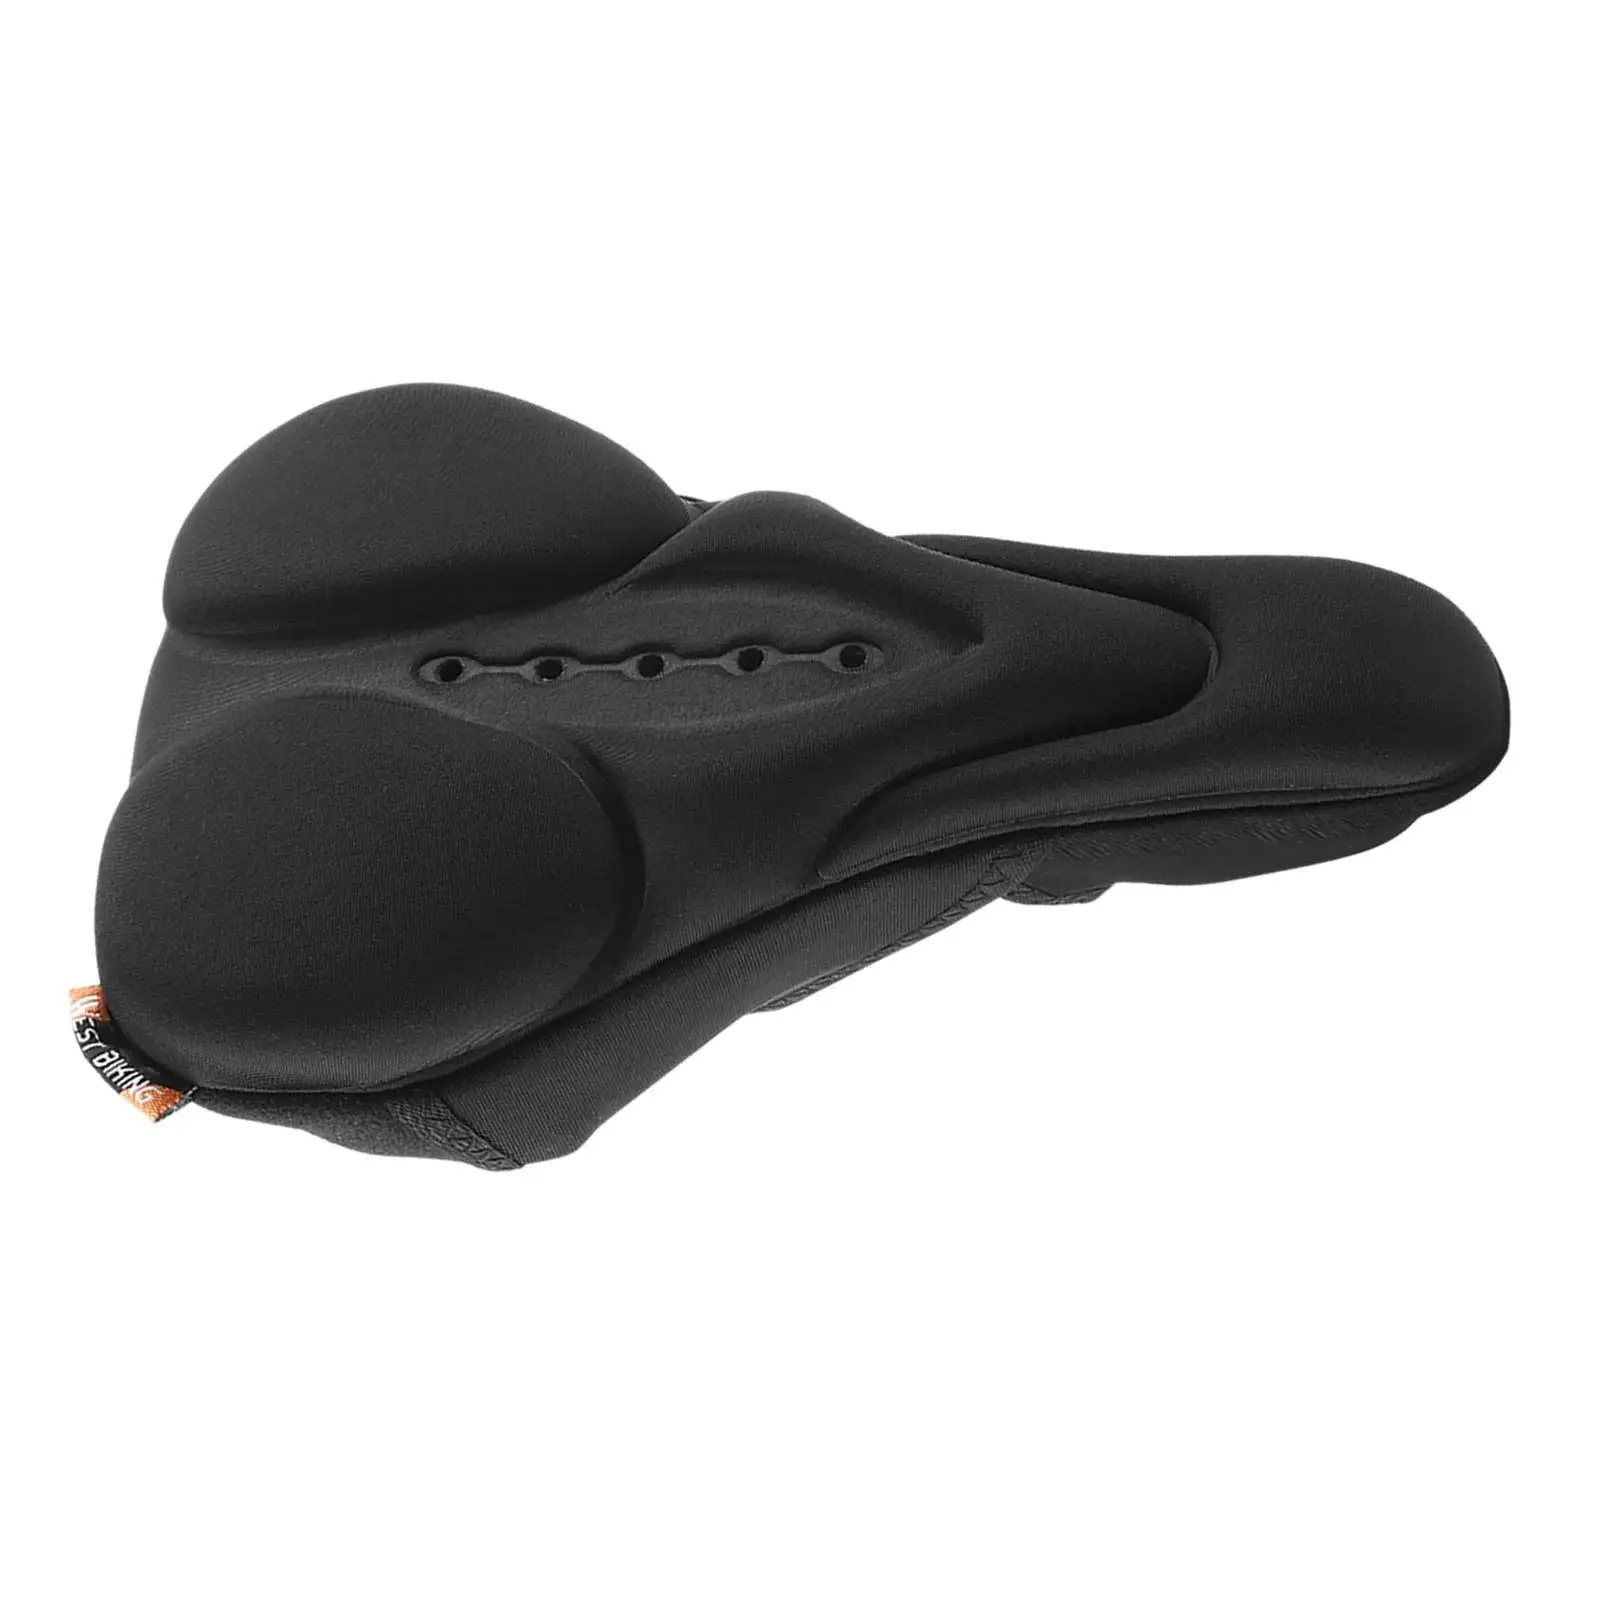 Bicycle Cushion, Bike Saddle, Non Slip, Cycling Components, Bicycle Seat Cover, Bike Seat for Outdoor Cycling, Road Bike